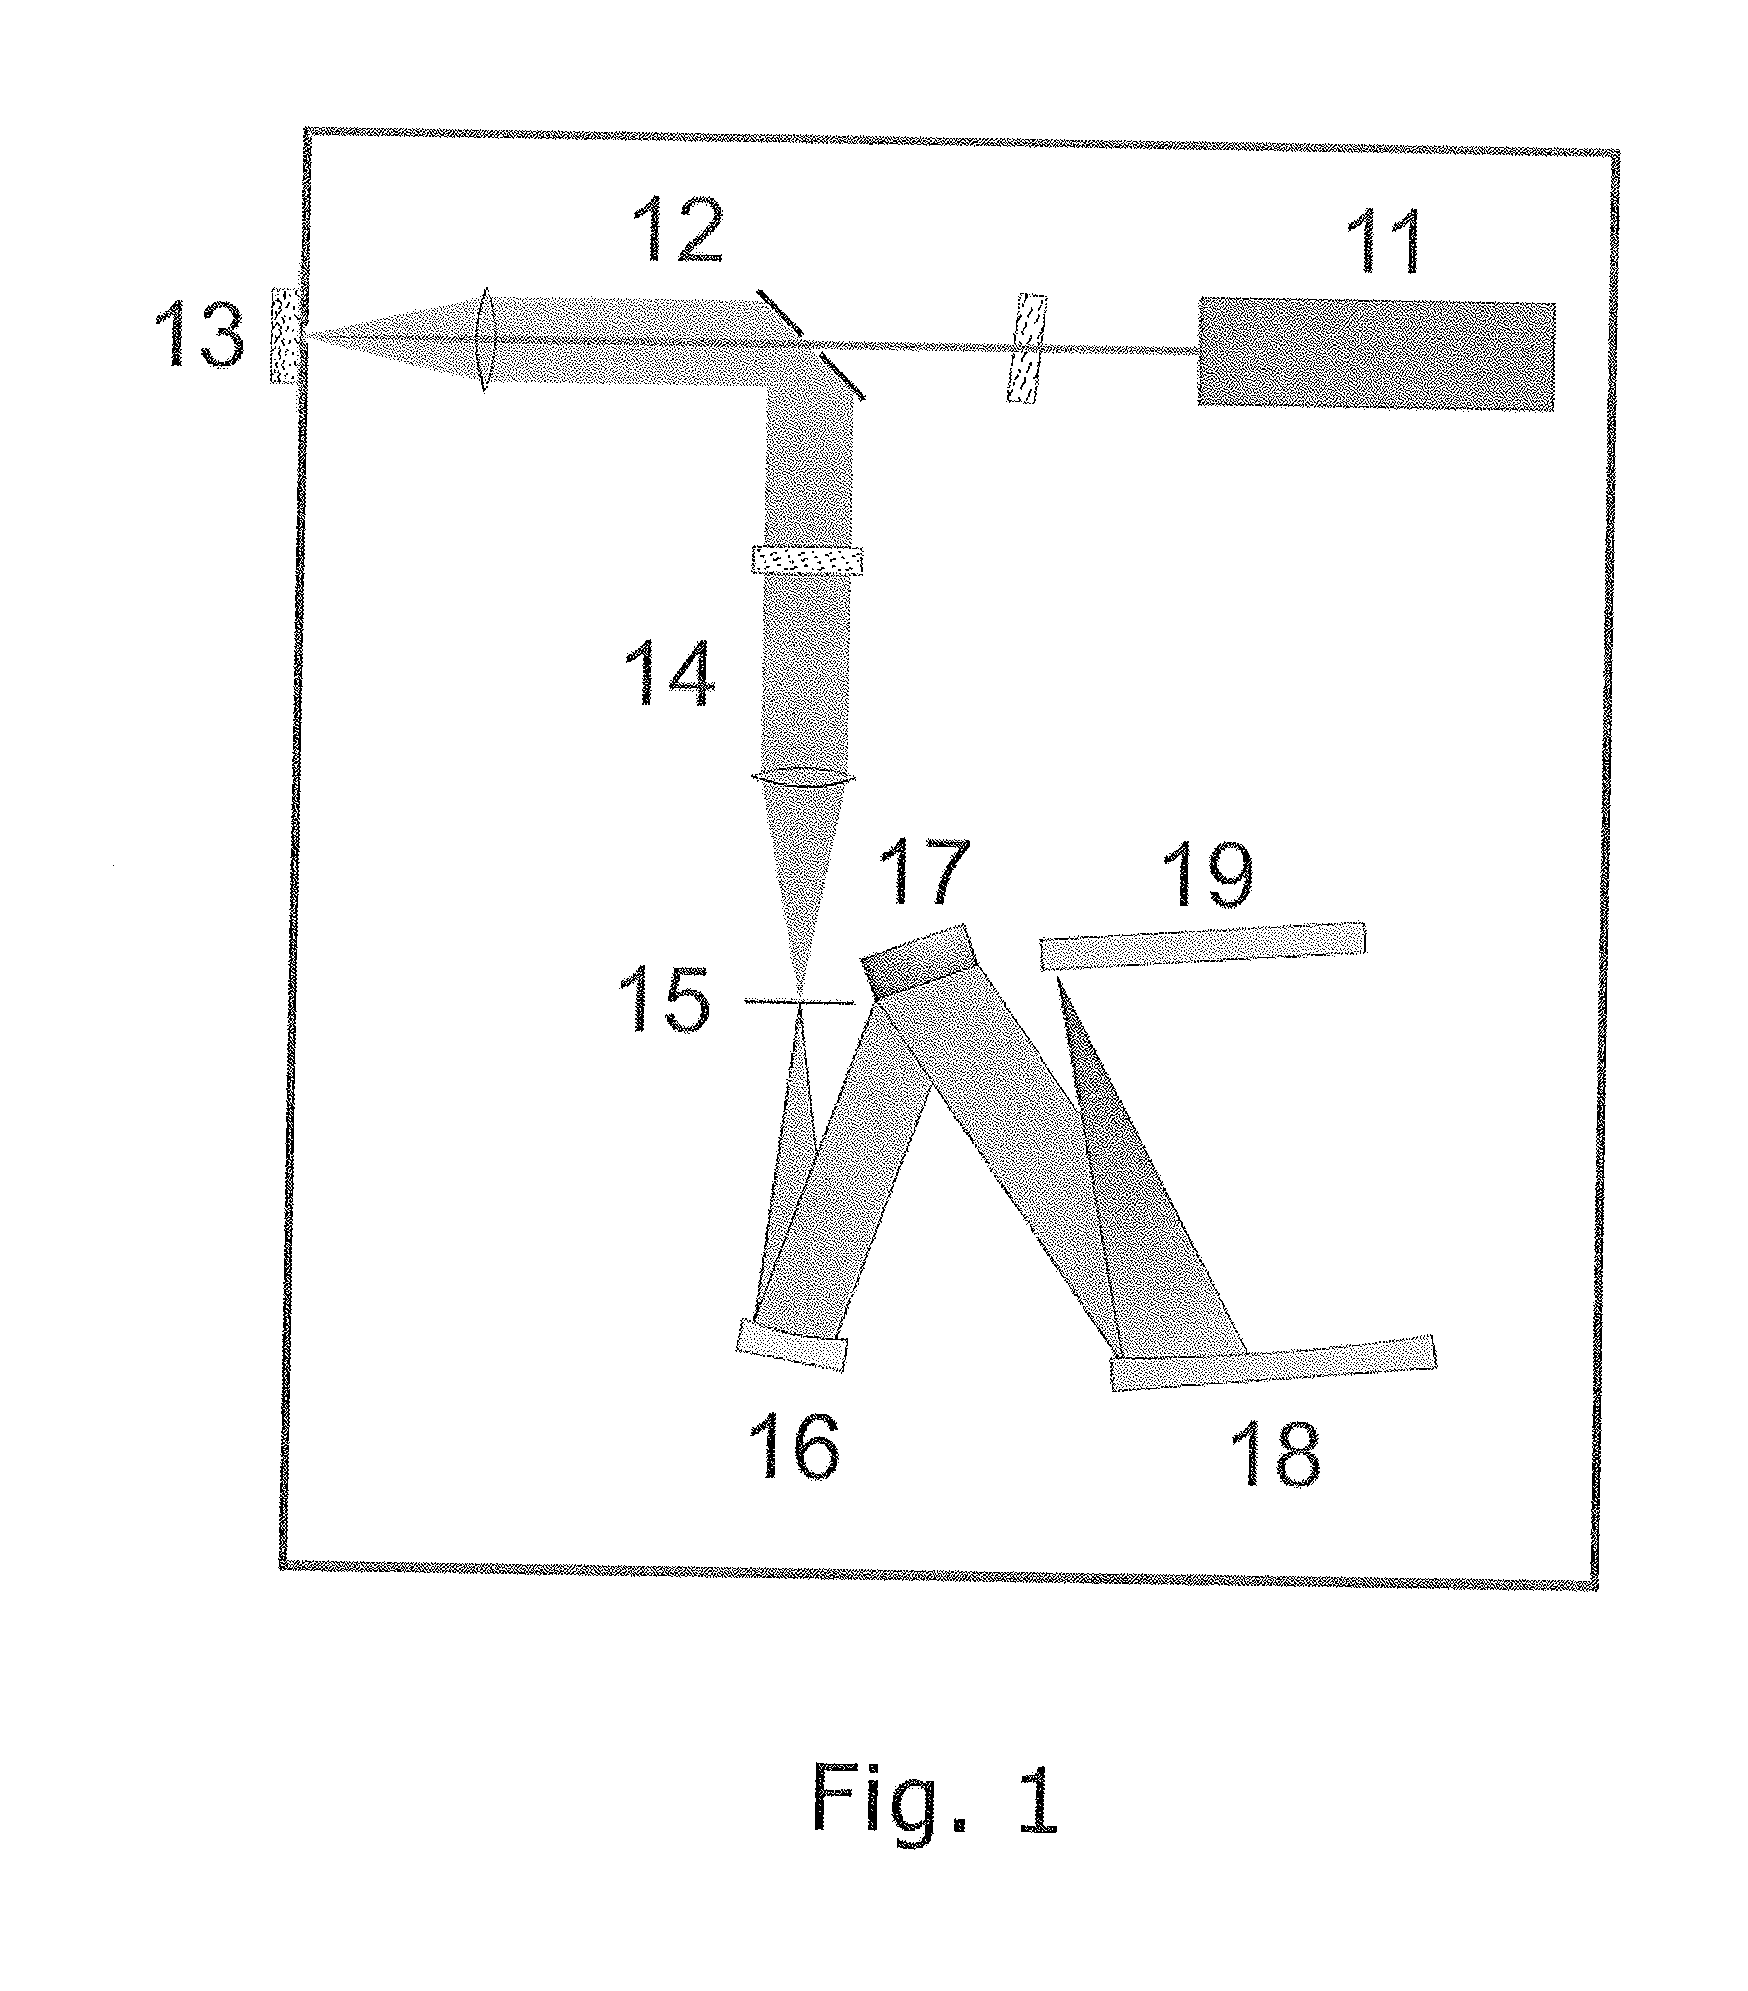 Apparatus and method for detecting raman and photoluminescence spectra of a substance